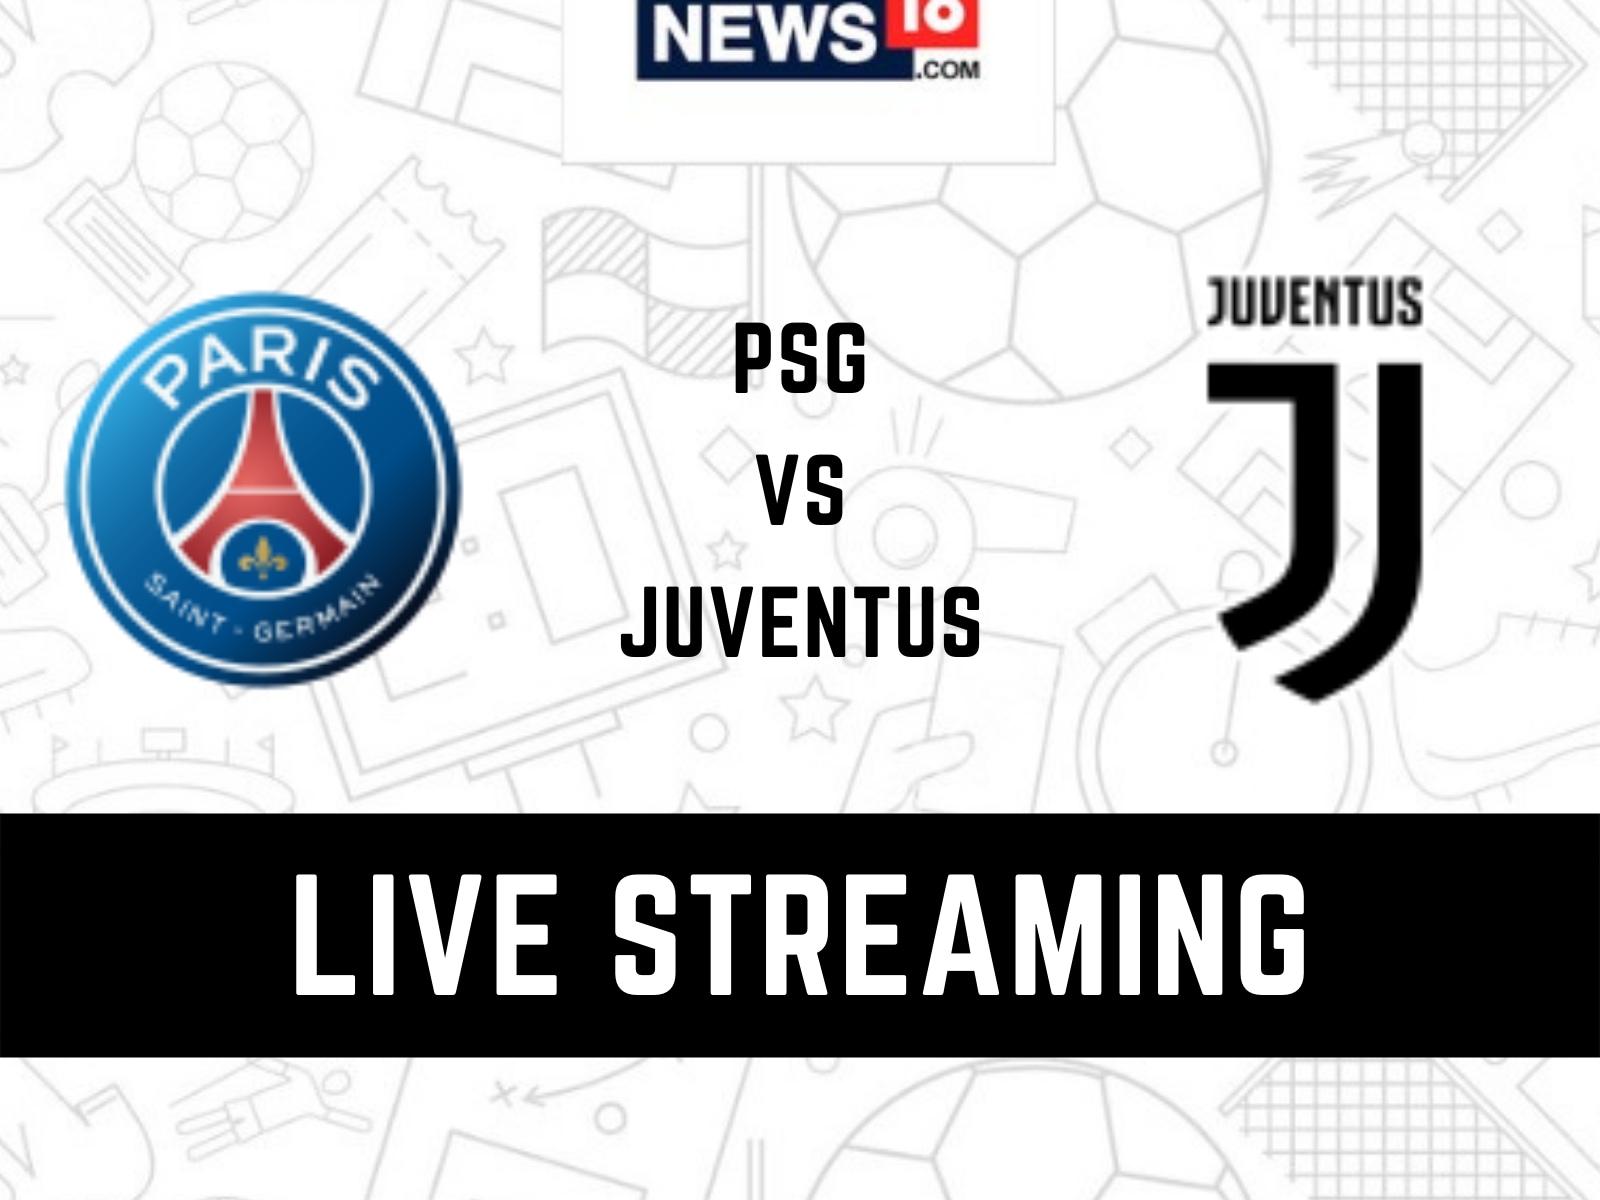 PSG vs Juventus Live Streaming When and Where to watch Paris Saint-Germain vs Juventus UEFA Champions League Live Coverage on Live TV Online